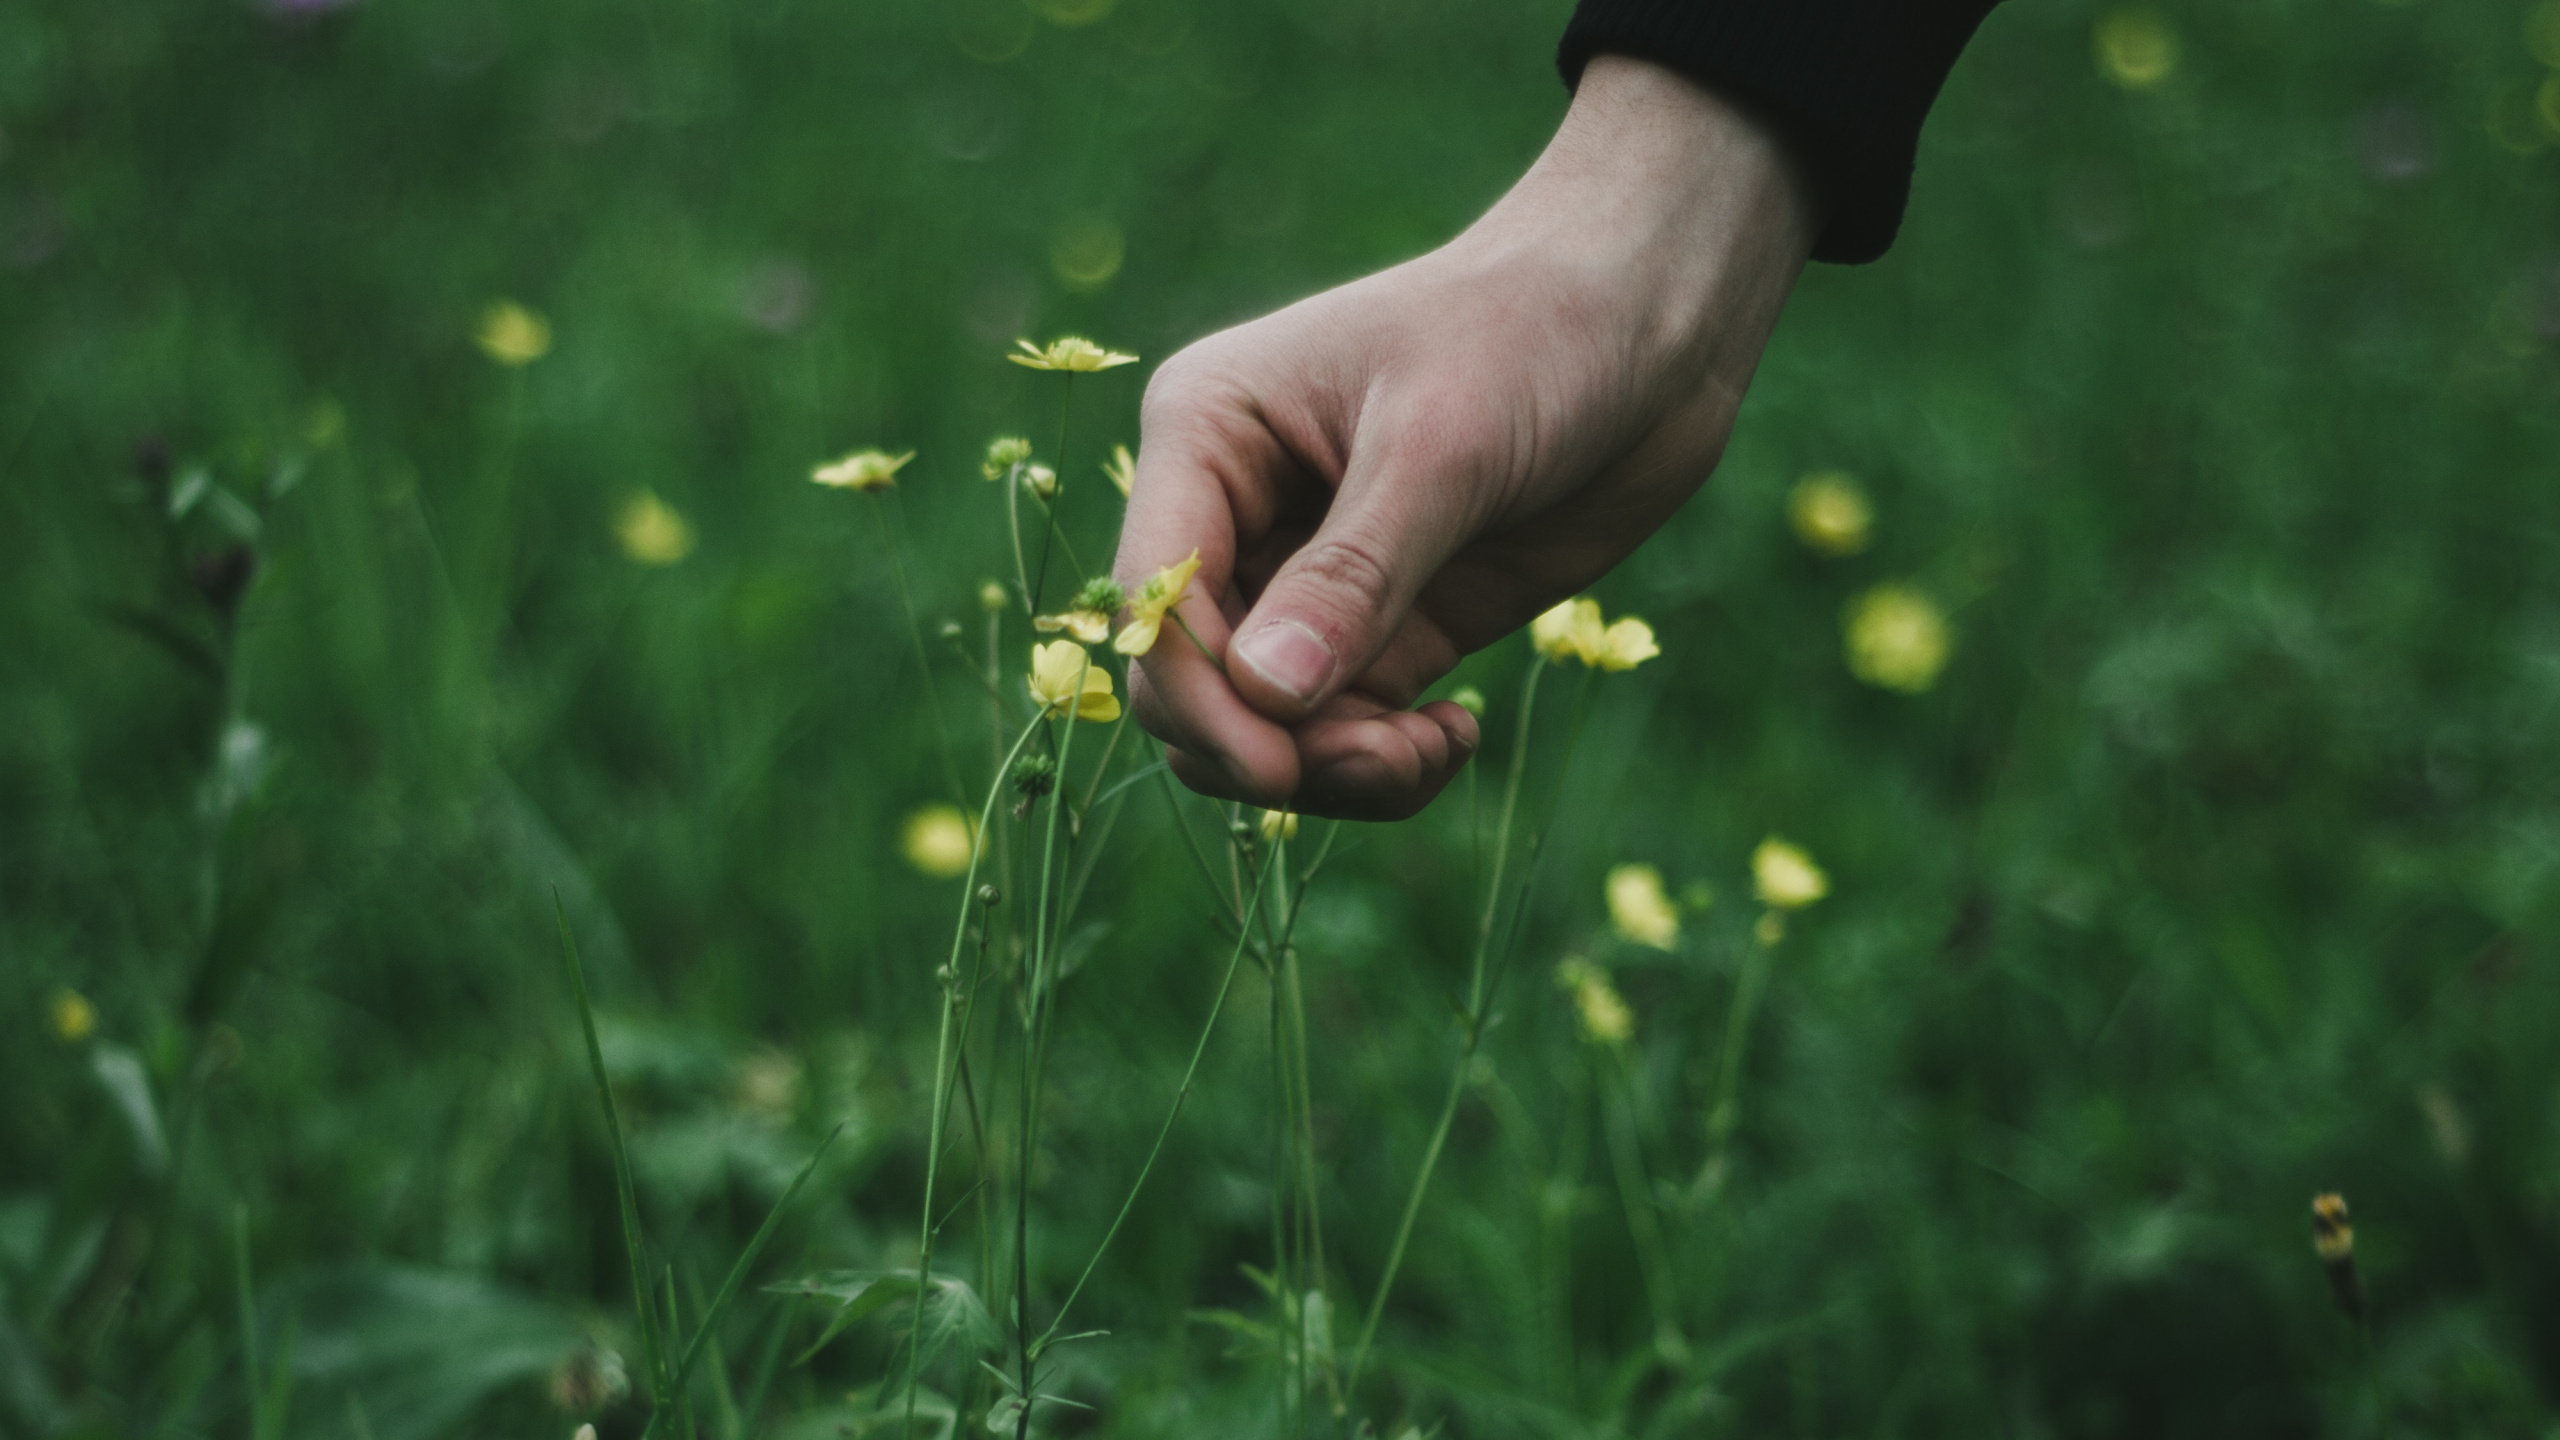 Person Holding Yellow Flower During Daytime. Wallpaper in 2560x1440 Resolution